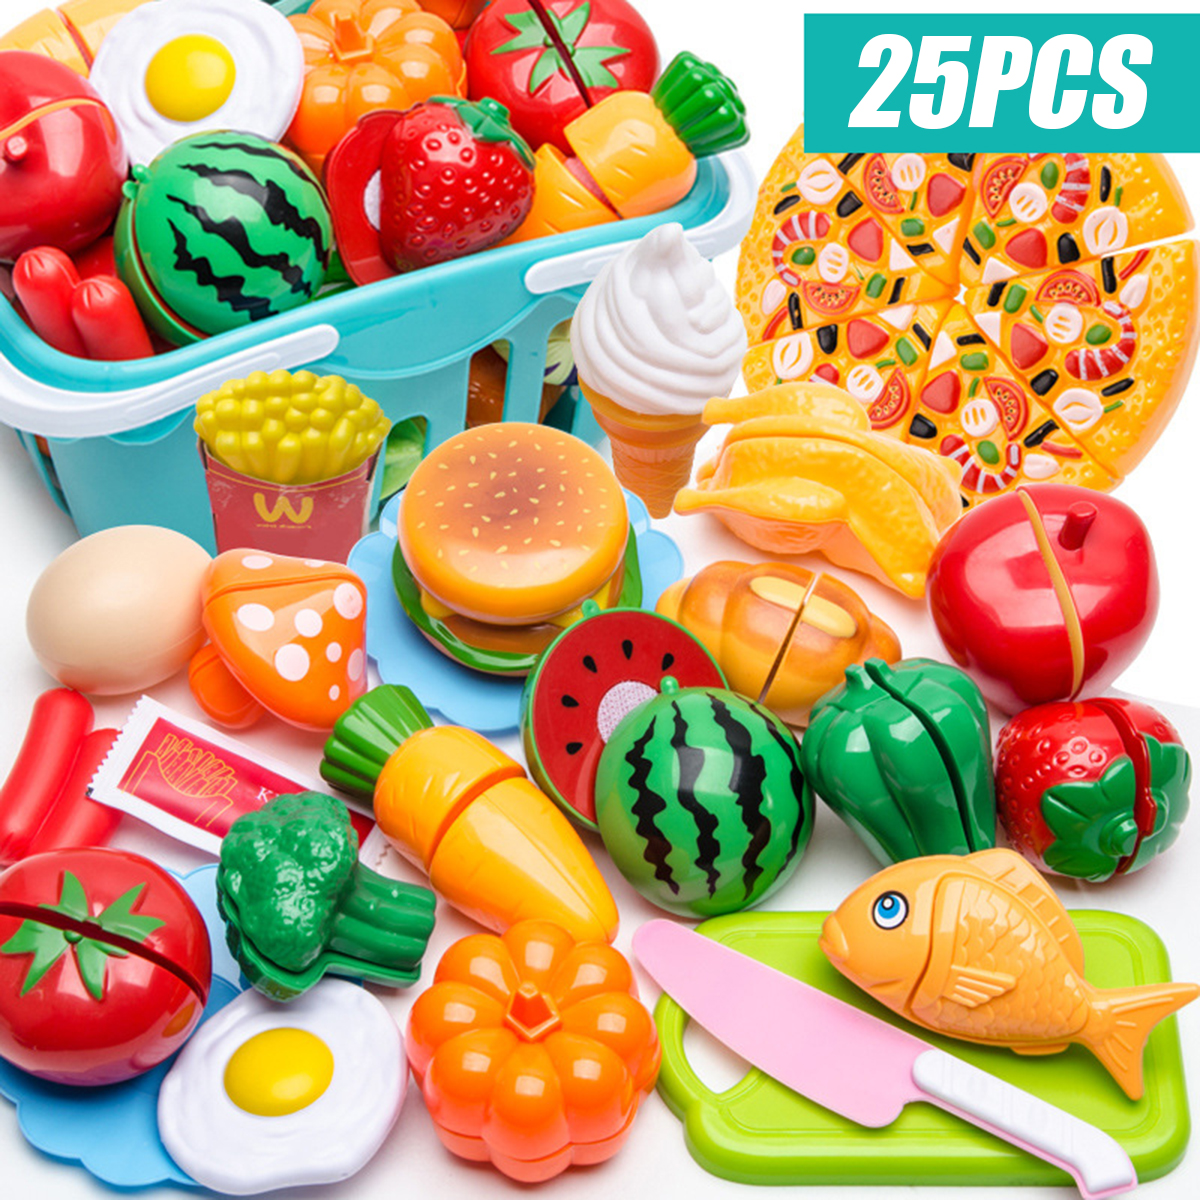 23Pcs/Set Food Pretend Role Play Toys Kitchen Cutting Fruit Vegetable Kids Gift 